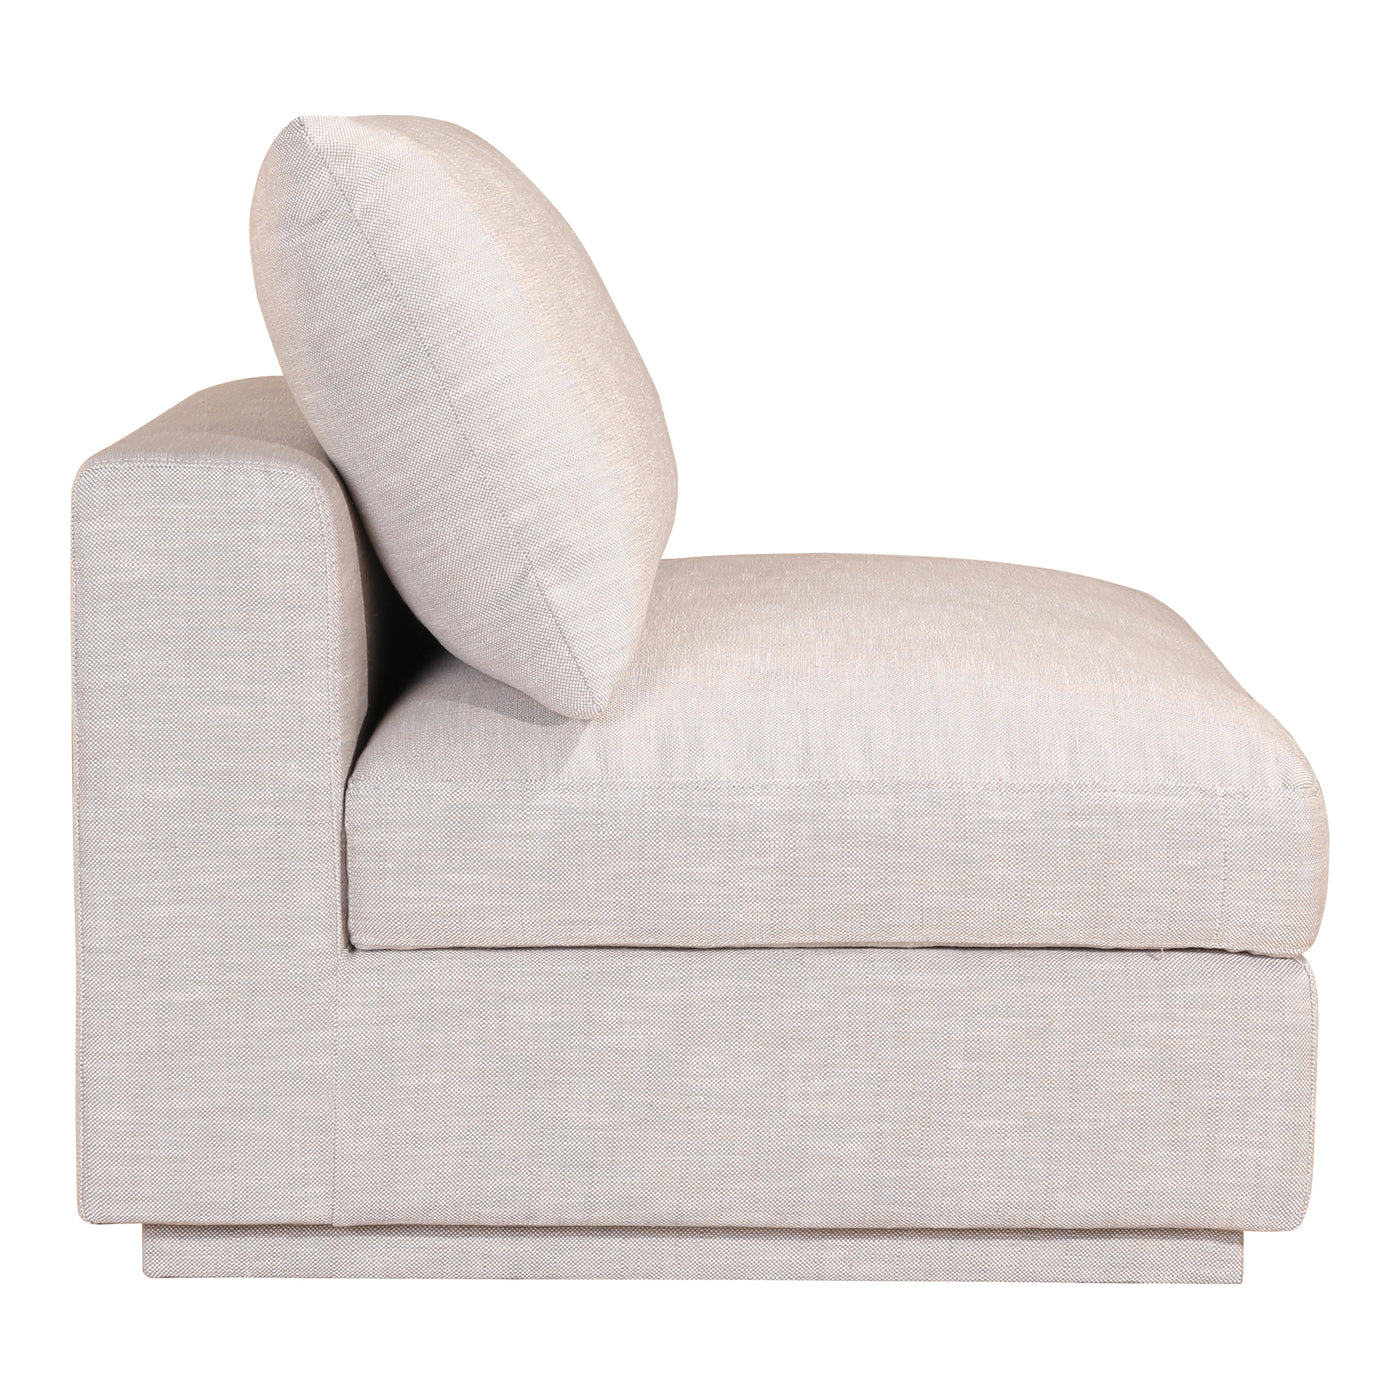 The Justin Slipper Chair's classic design and soft linen finish make it the perfect addition to your living room. Its pale...